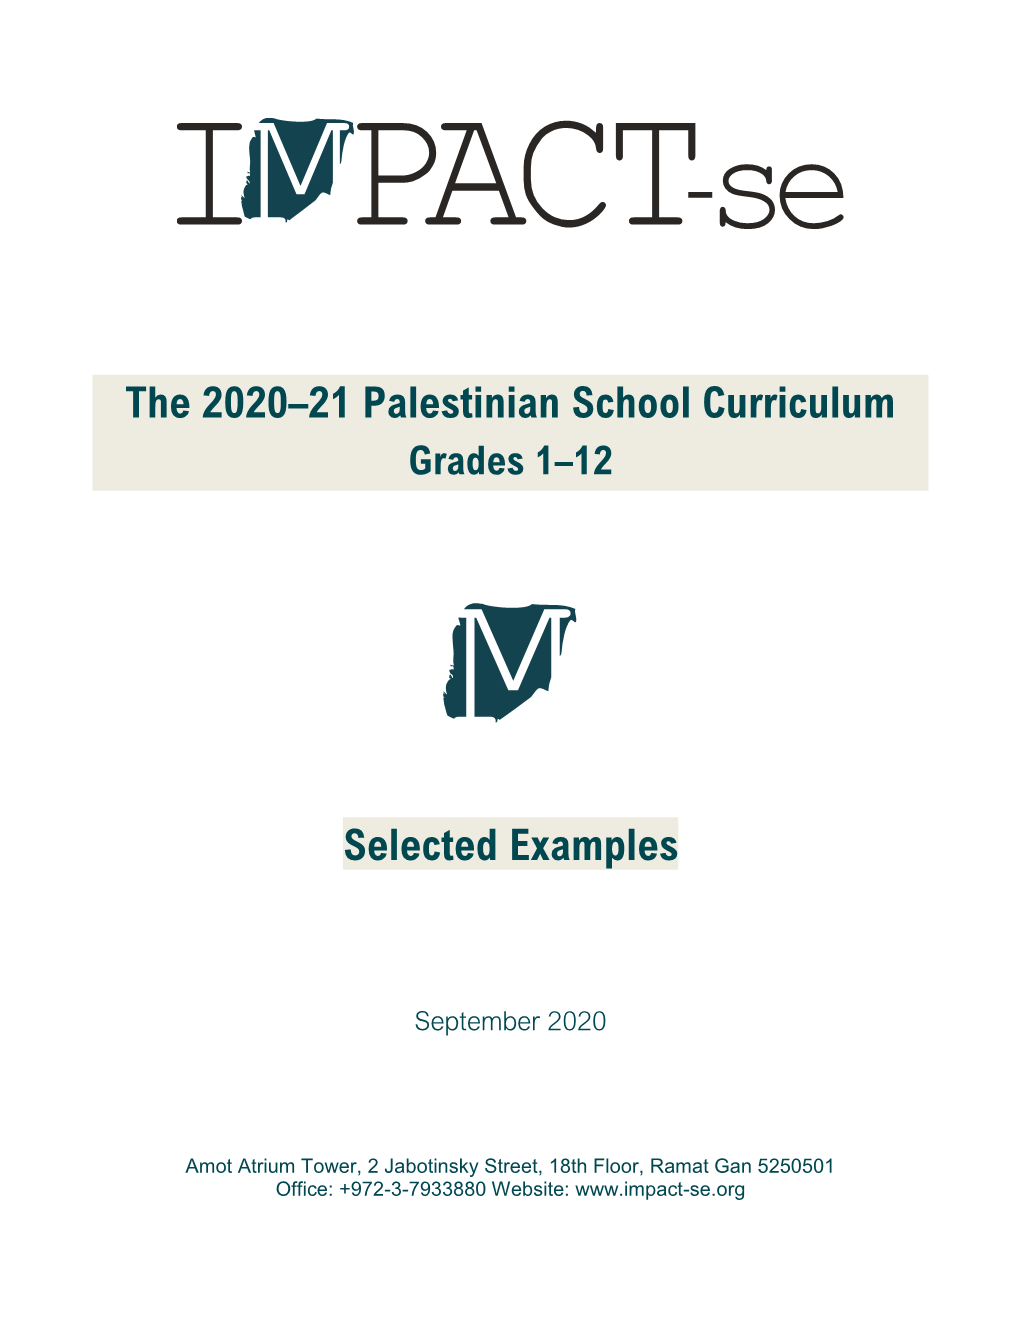 The 2020–21 Palestinian School Curriculum Selected Examples